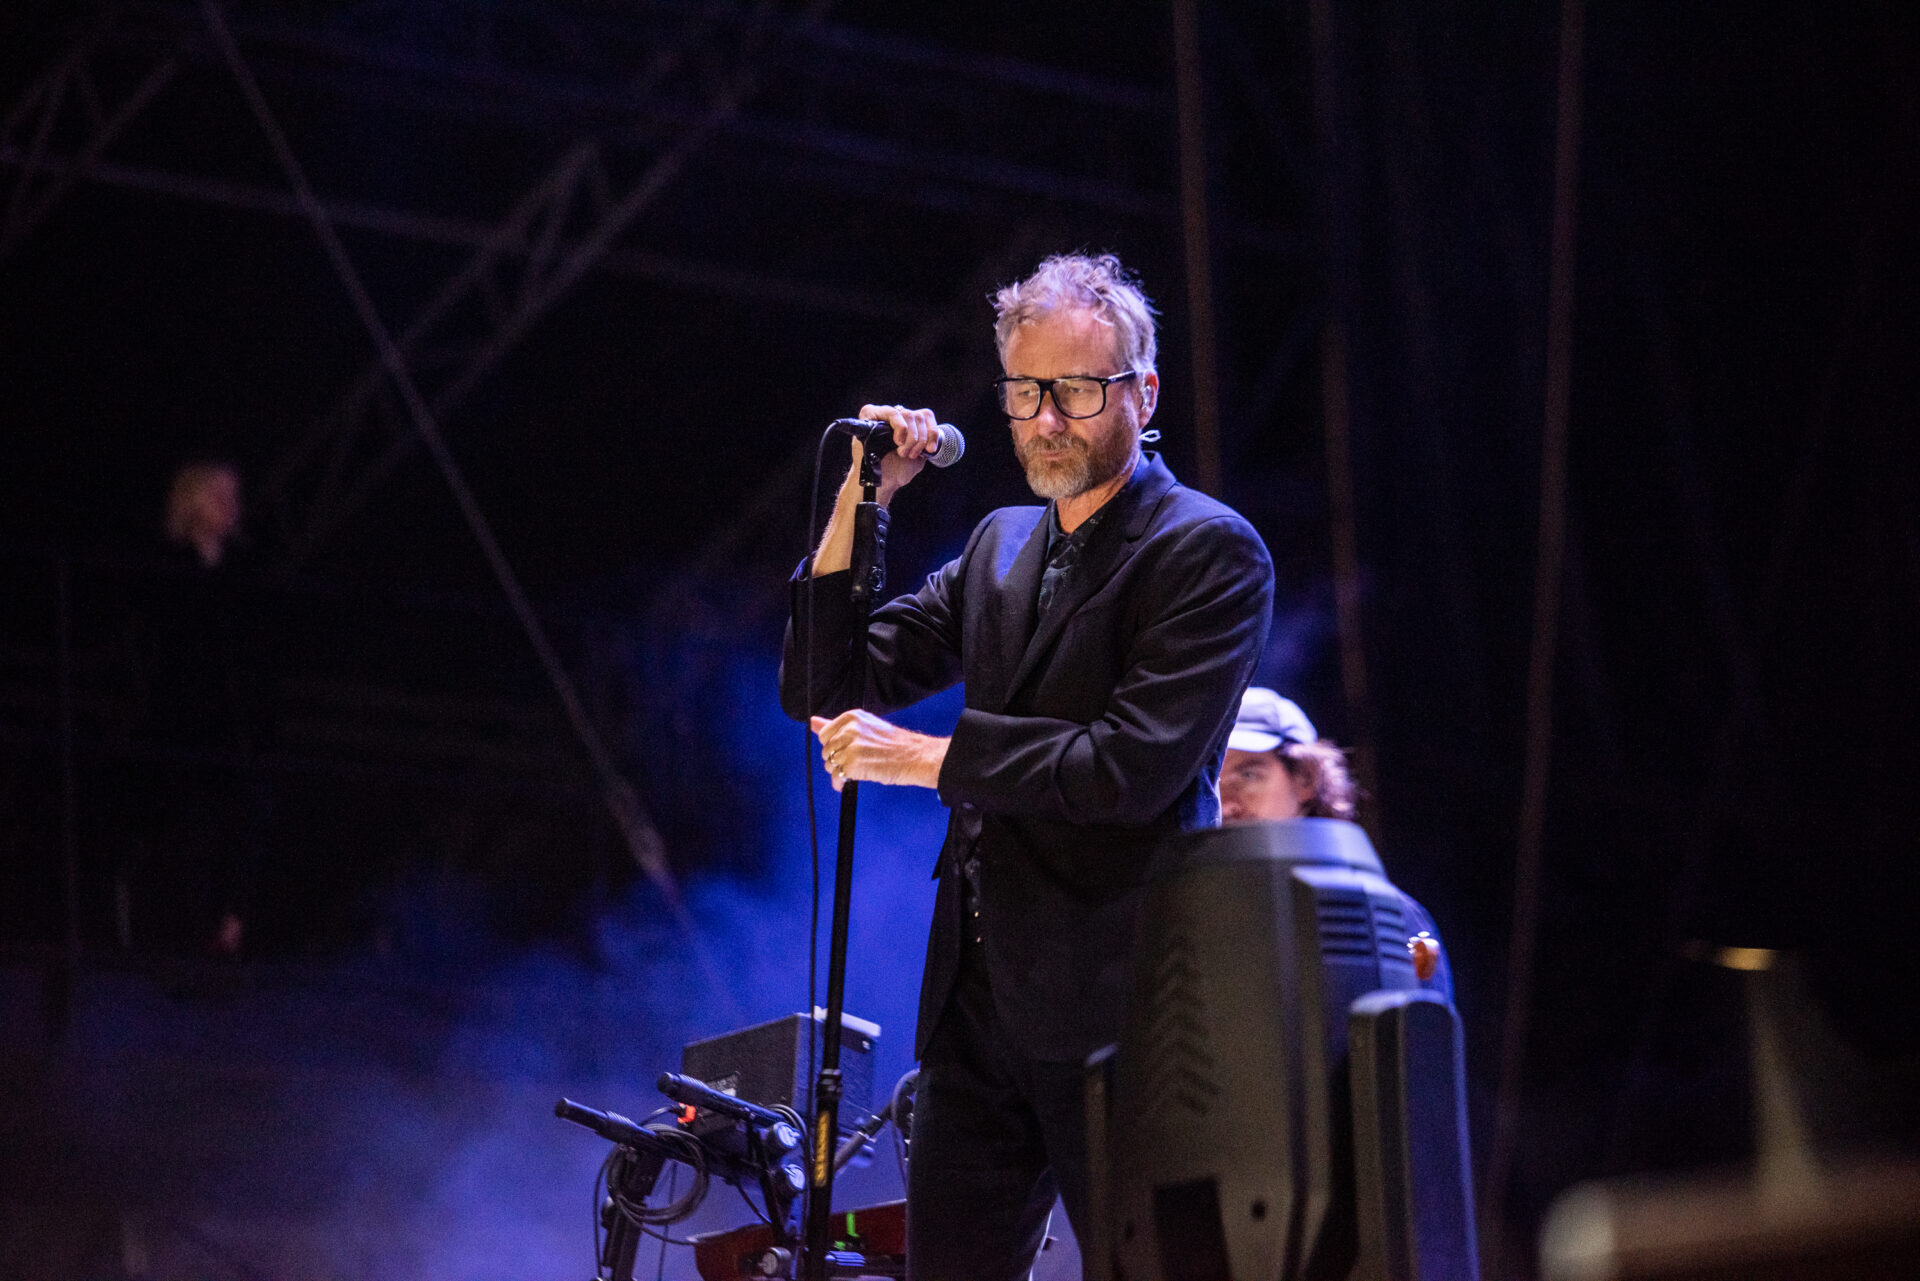 The National announce North American headlining tour